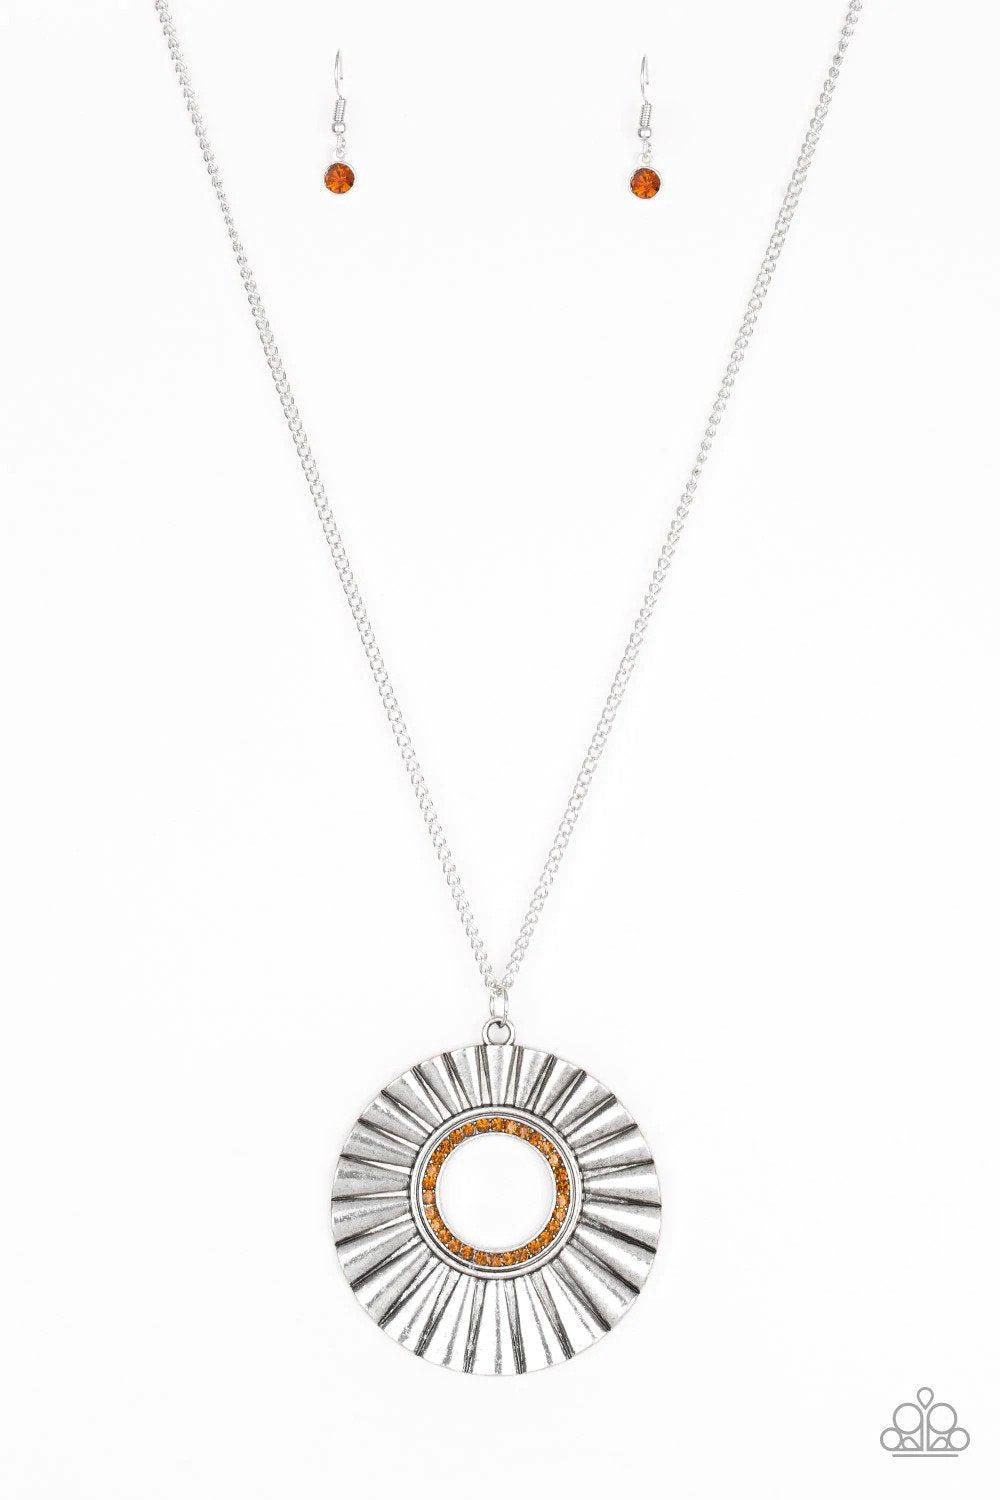 Chicly Centered Brown Necklace - Paparazzi Accessories- lightbox - CarasShop.com - $5 Jewelry by Cara Jewels